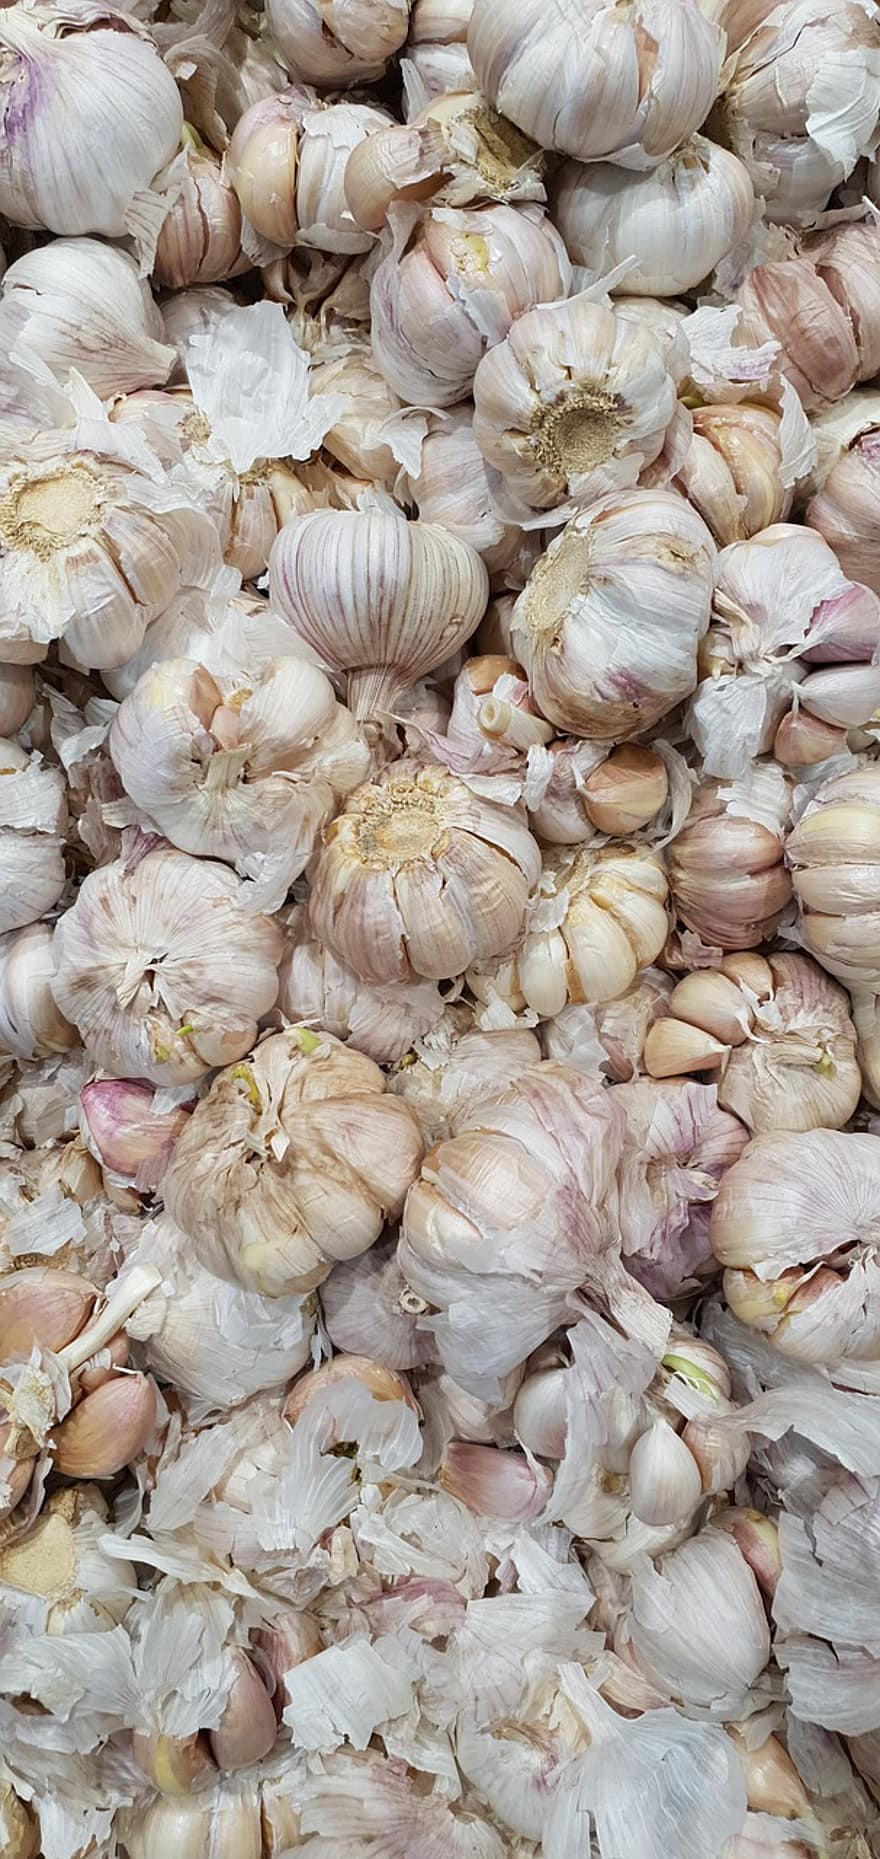 Garlic, Vegetables, Organic, Healthy, close-up, food, freshness, backgrounds, vegetable, gourmet, spice